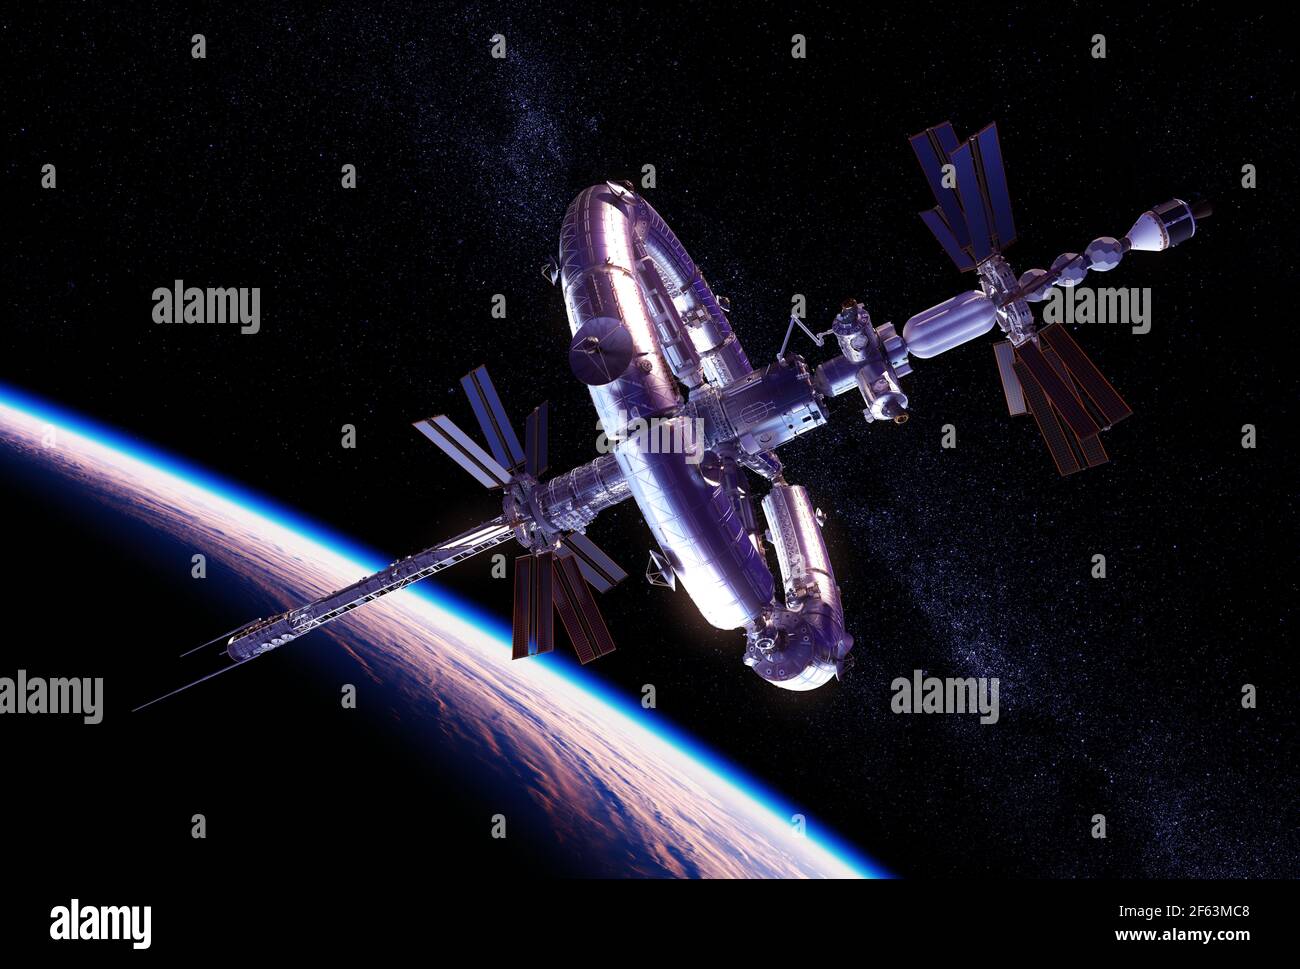 New Big Space Station Orbiting Planet Earth Stock Photo